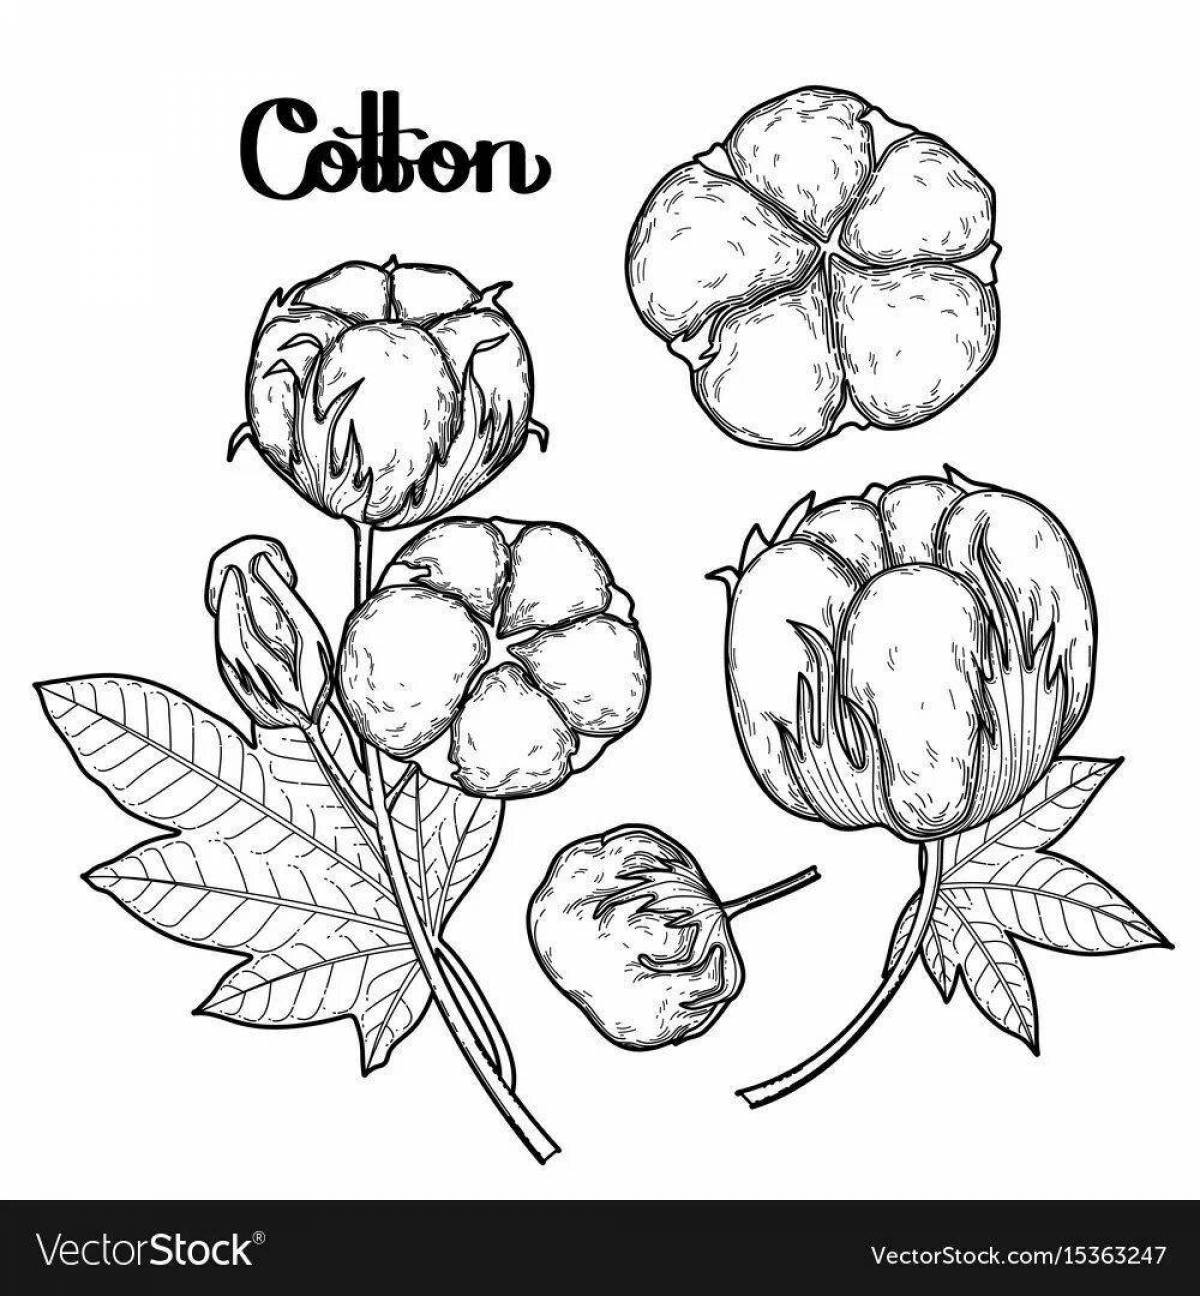 Fun coloring book made of cotton for children